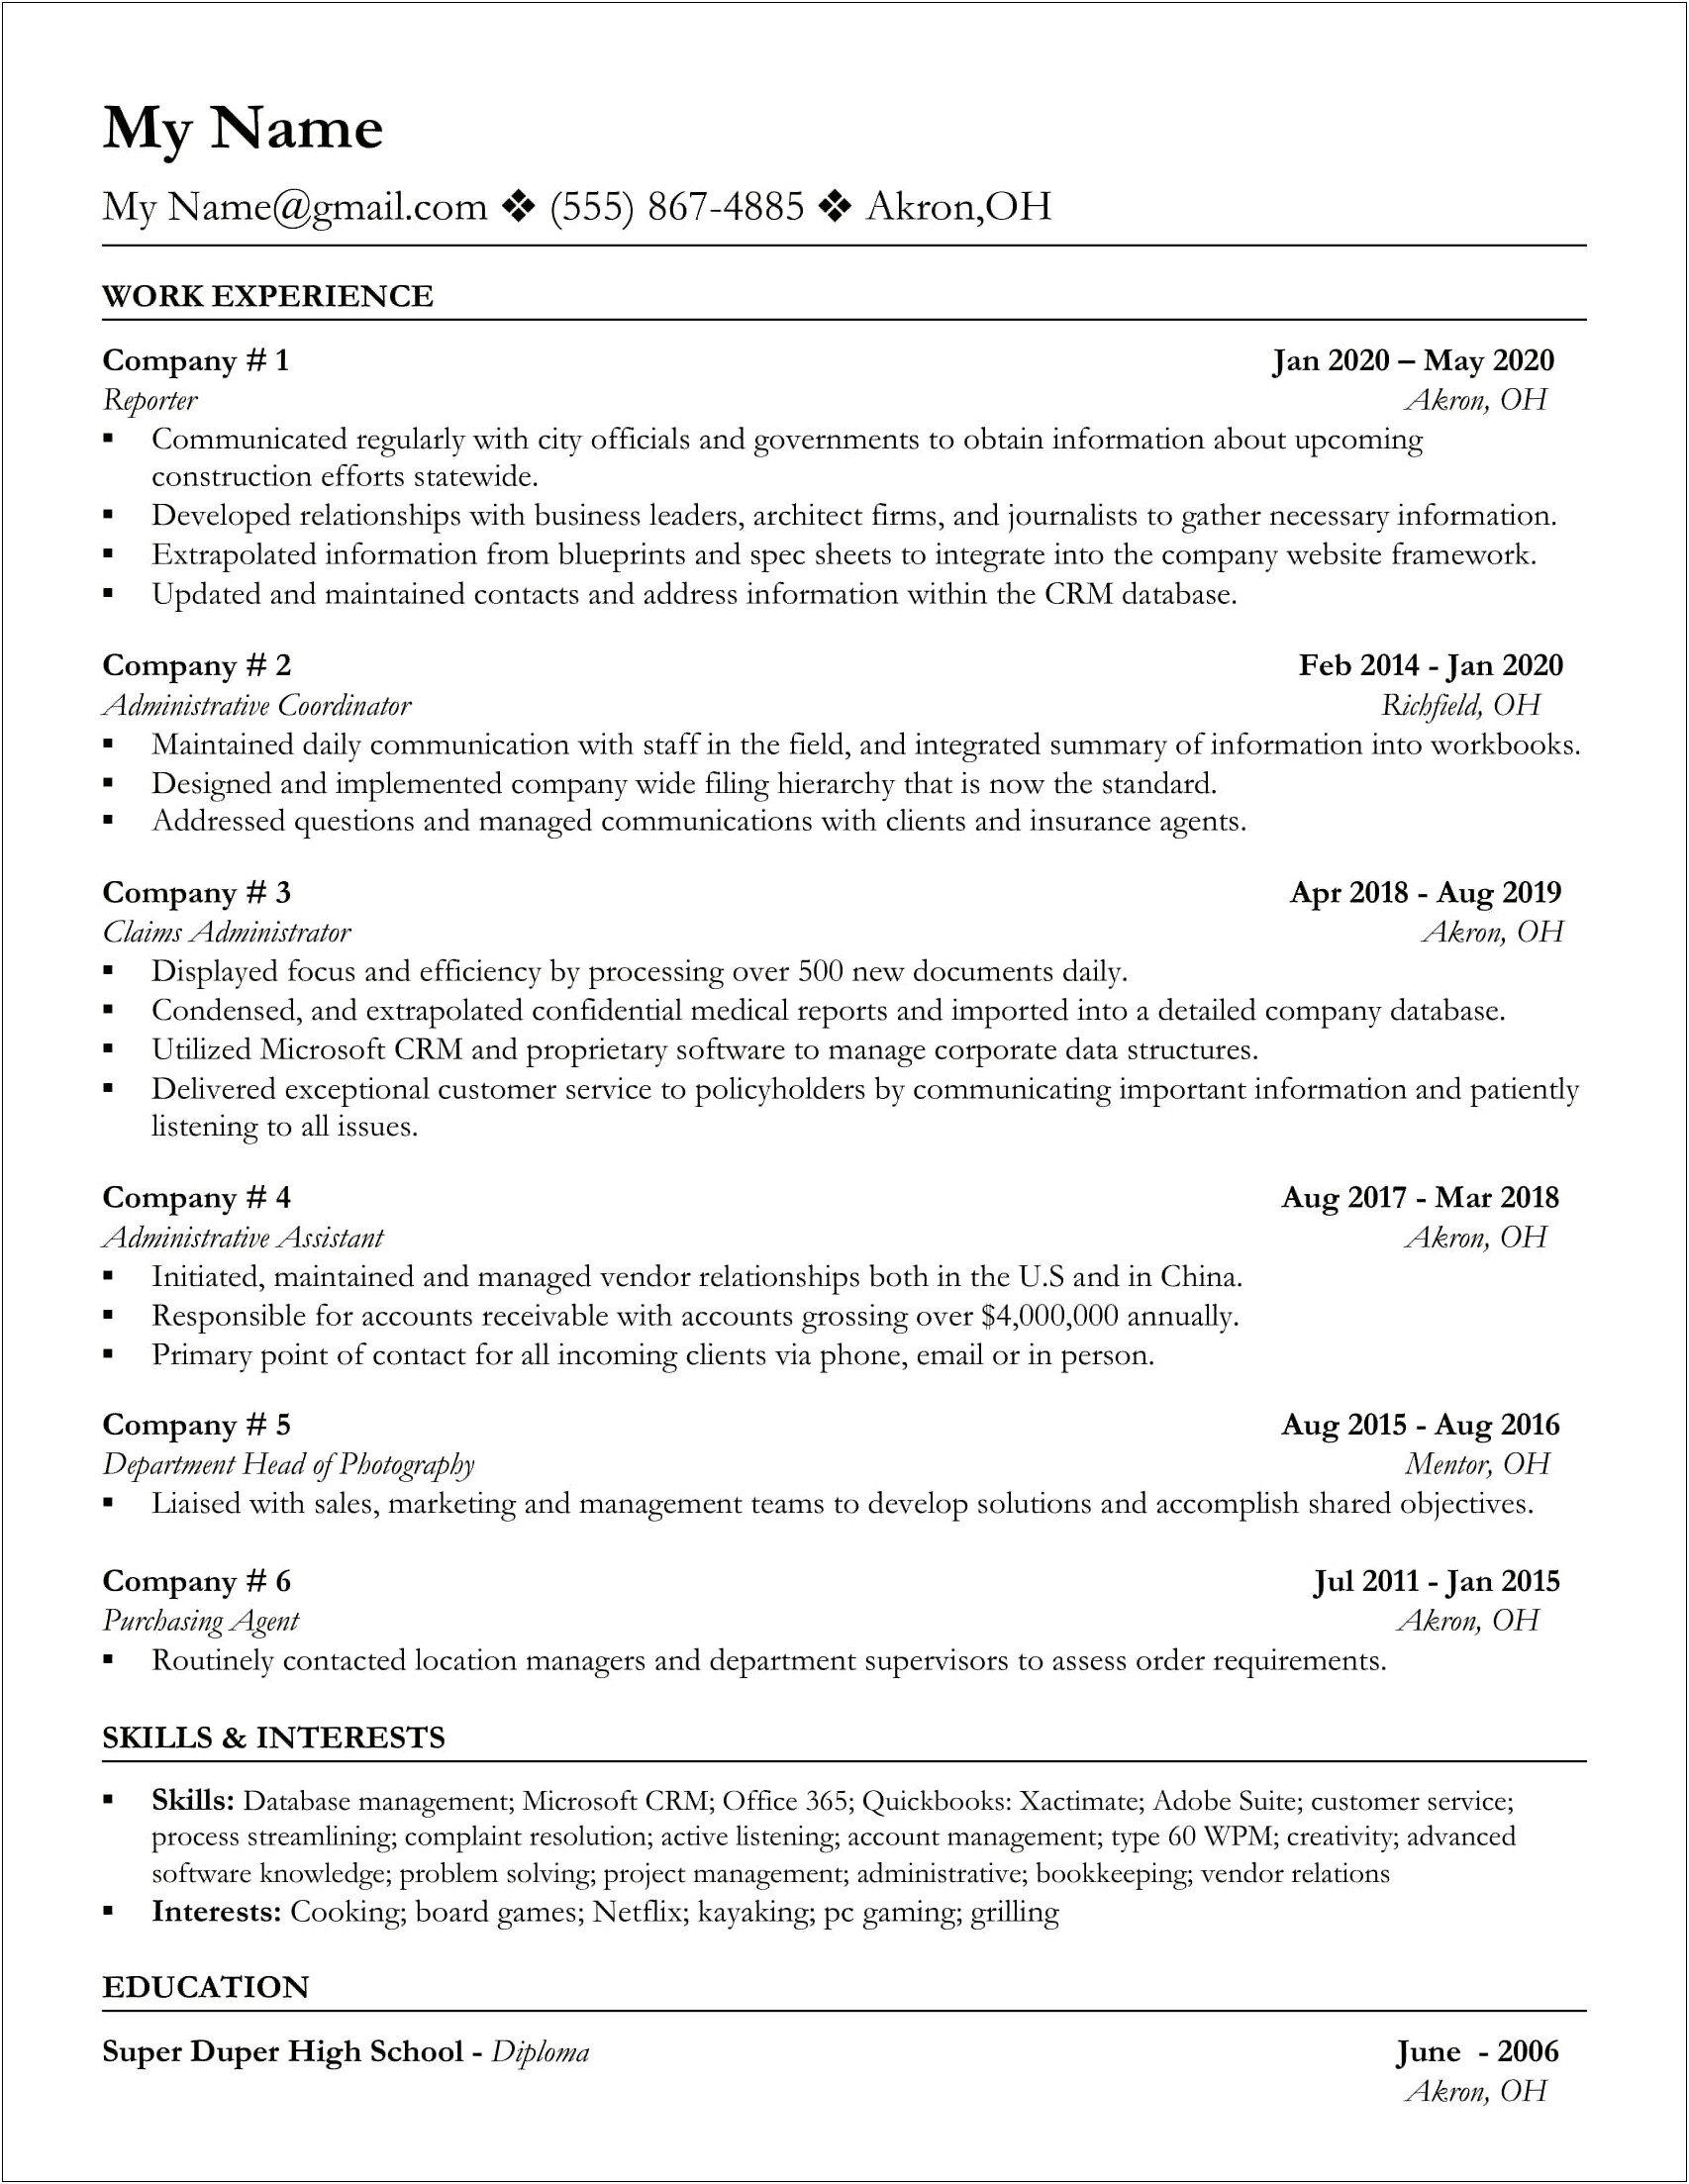 Resume Objective For Data Entry Position